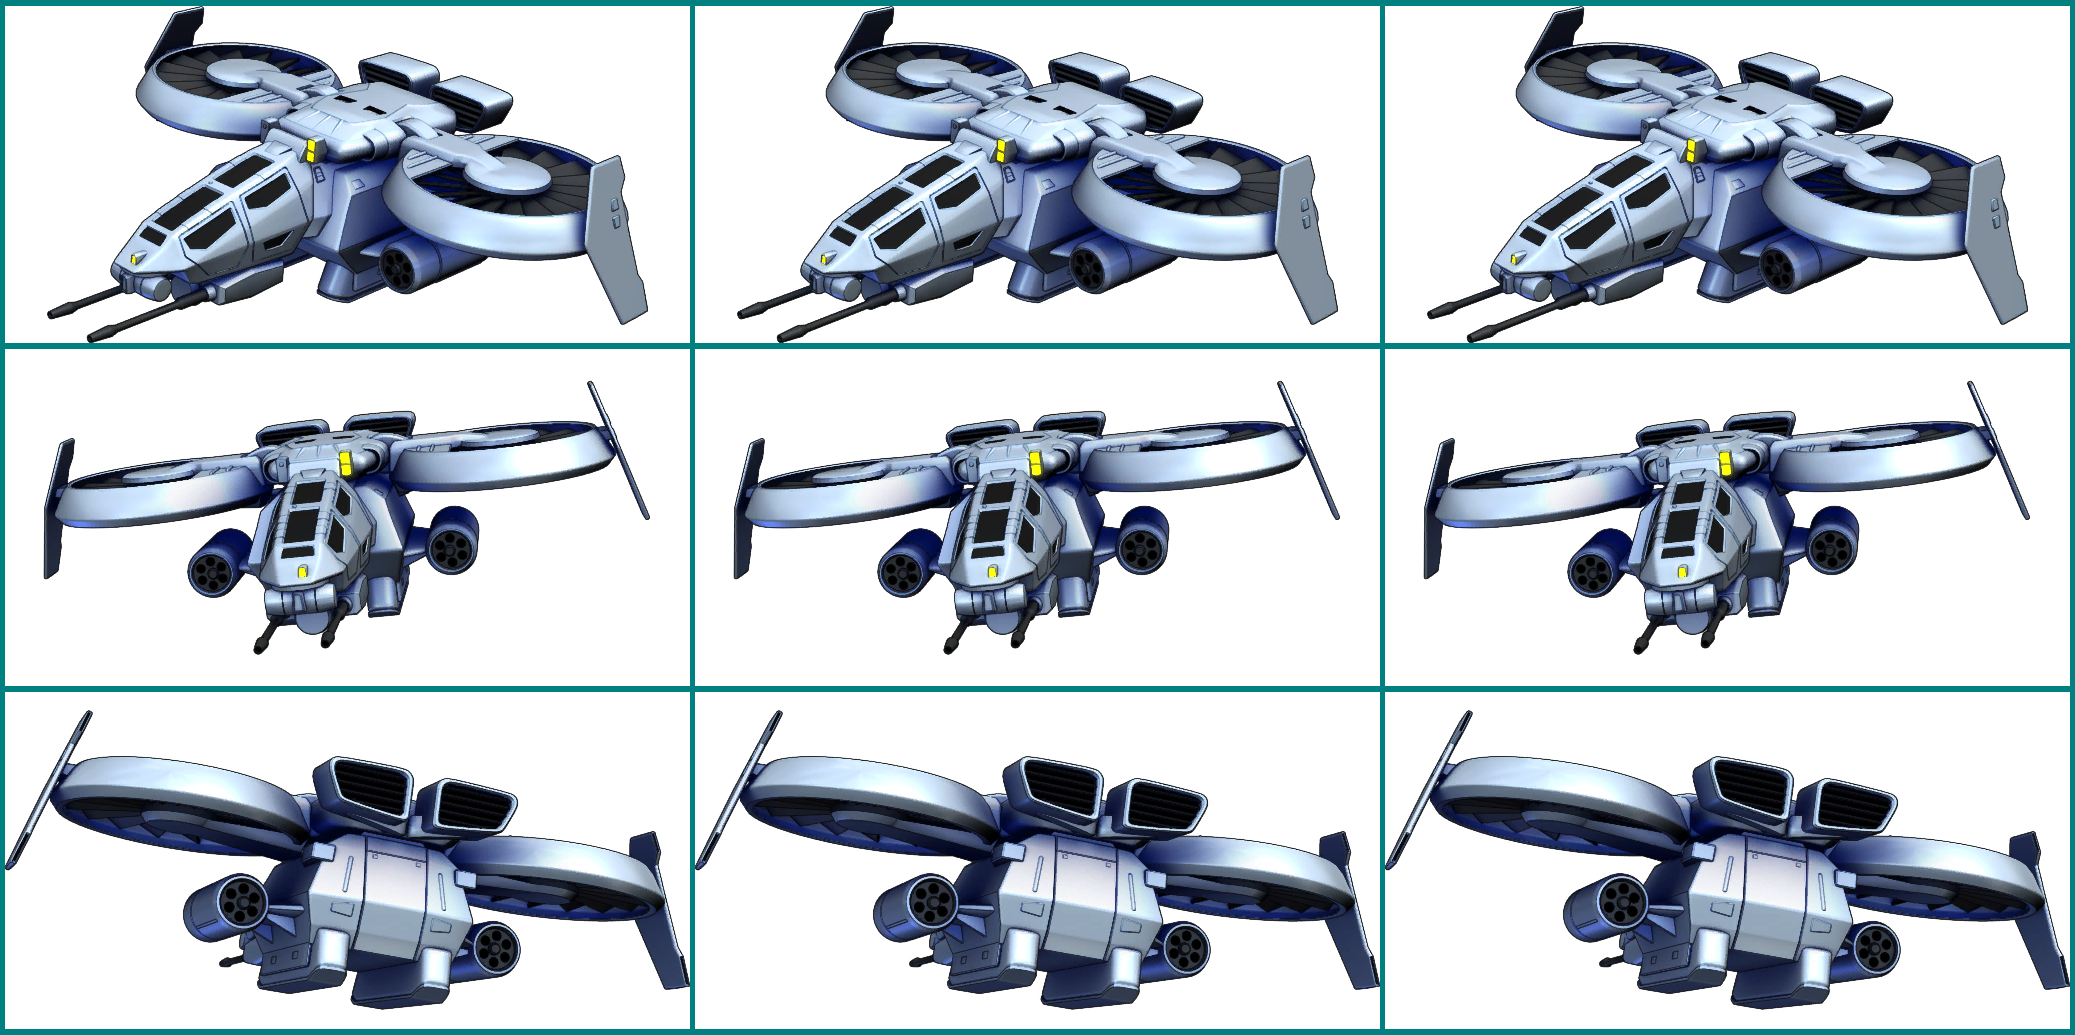 SD Gundam G Generation Cross Rays - Combat Helicopter (Orb Forces)